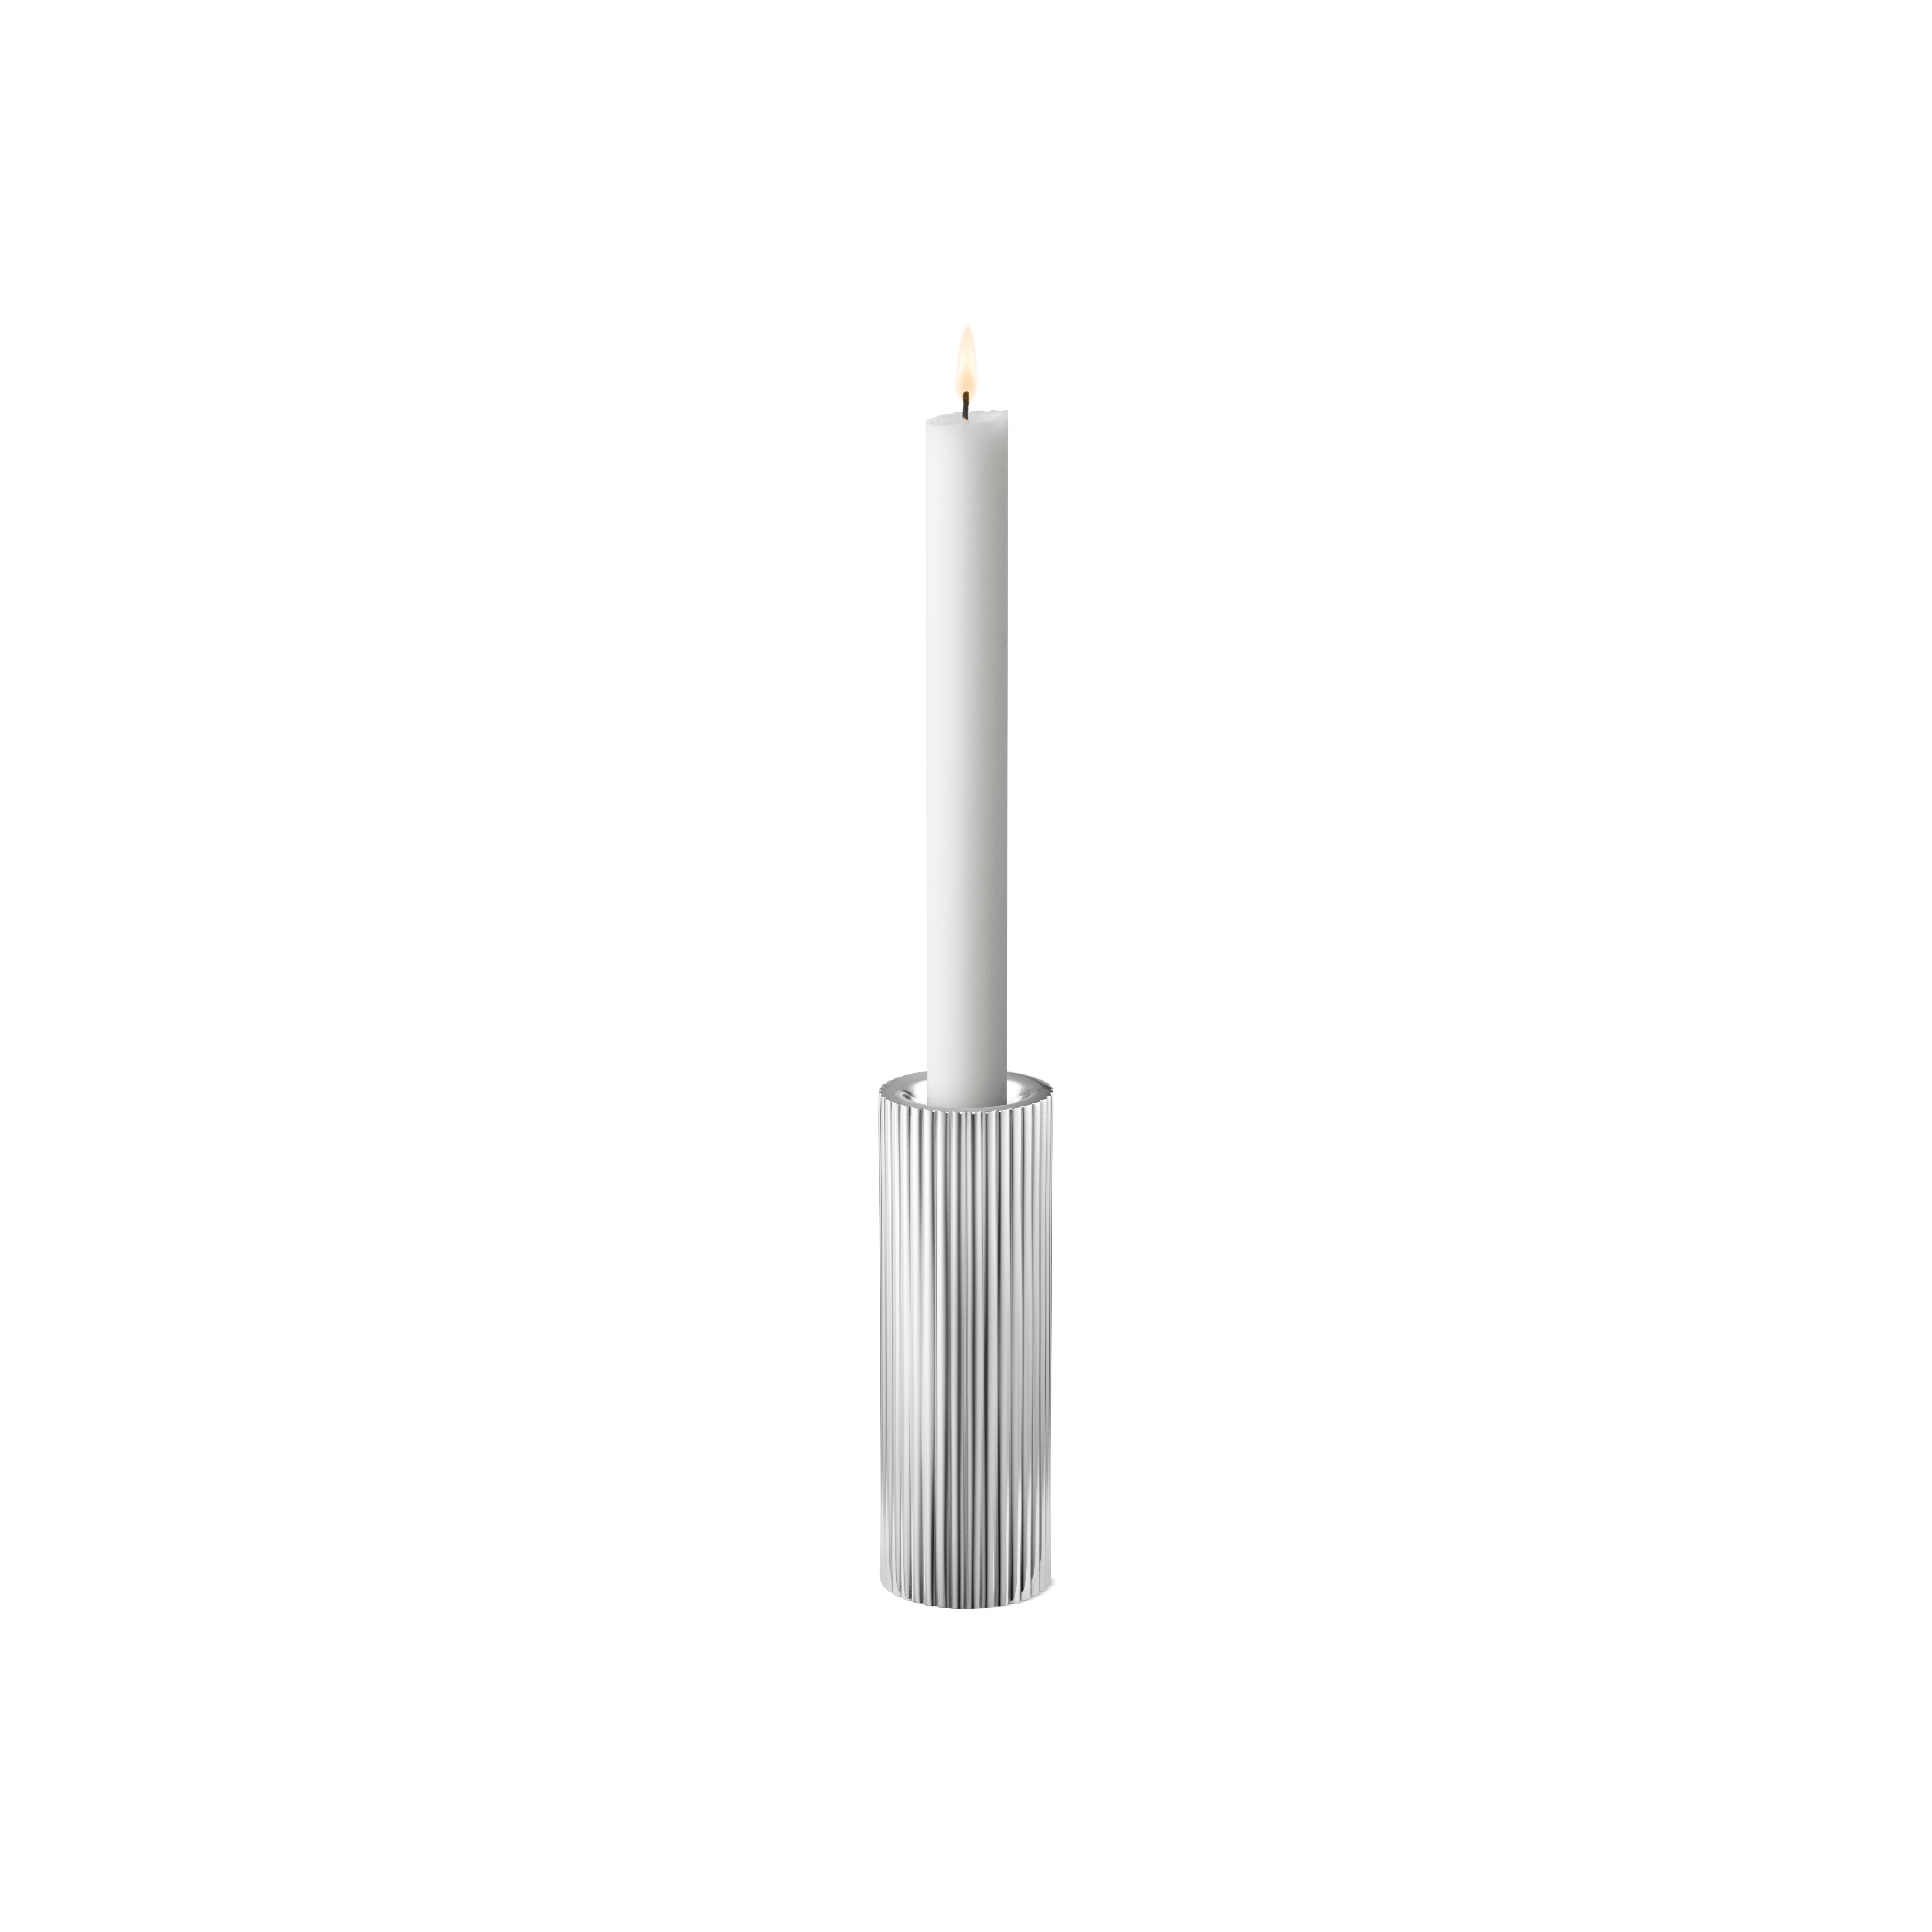 With its stringent grooves running from top to bottom, this Art Deco influenced candle holder makes for a stylish addition to any tabletop. It can also be conveniently turned upside down to become a tea-light holder! Mix with others of different